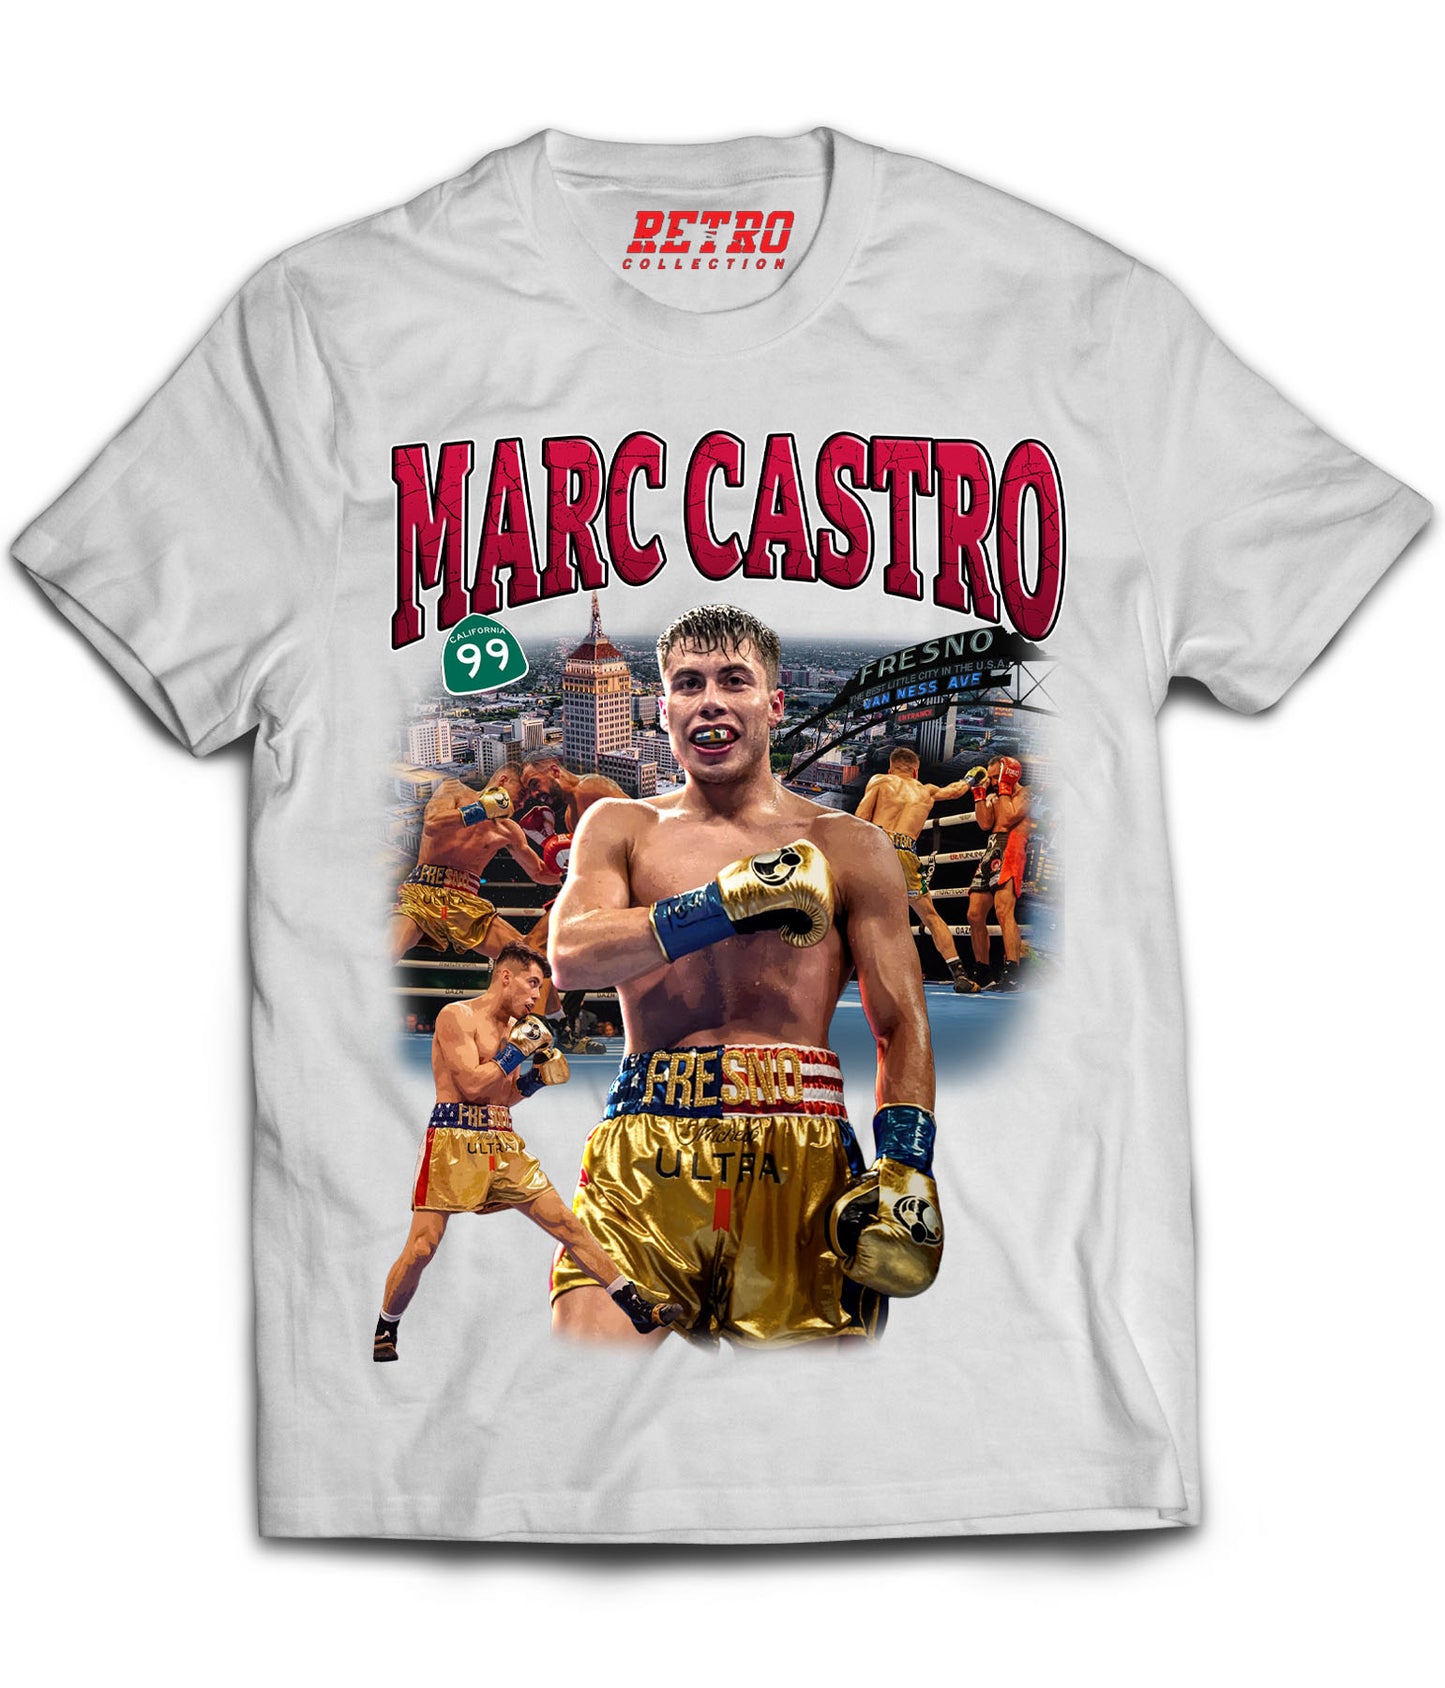 Marc Castro "CA 99" Tribute Shirt *LIMITED EDITION* (Black, Gray, Red, White)